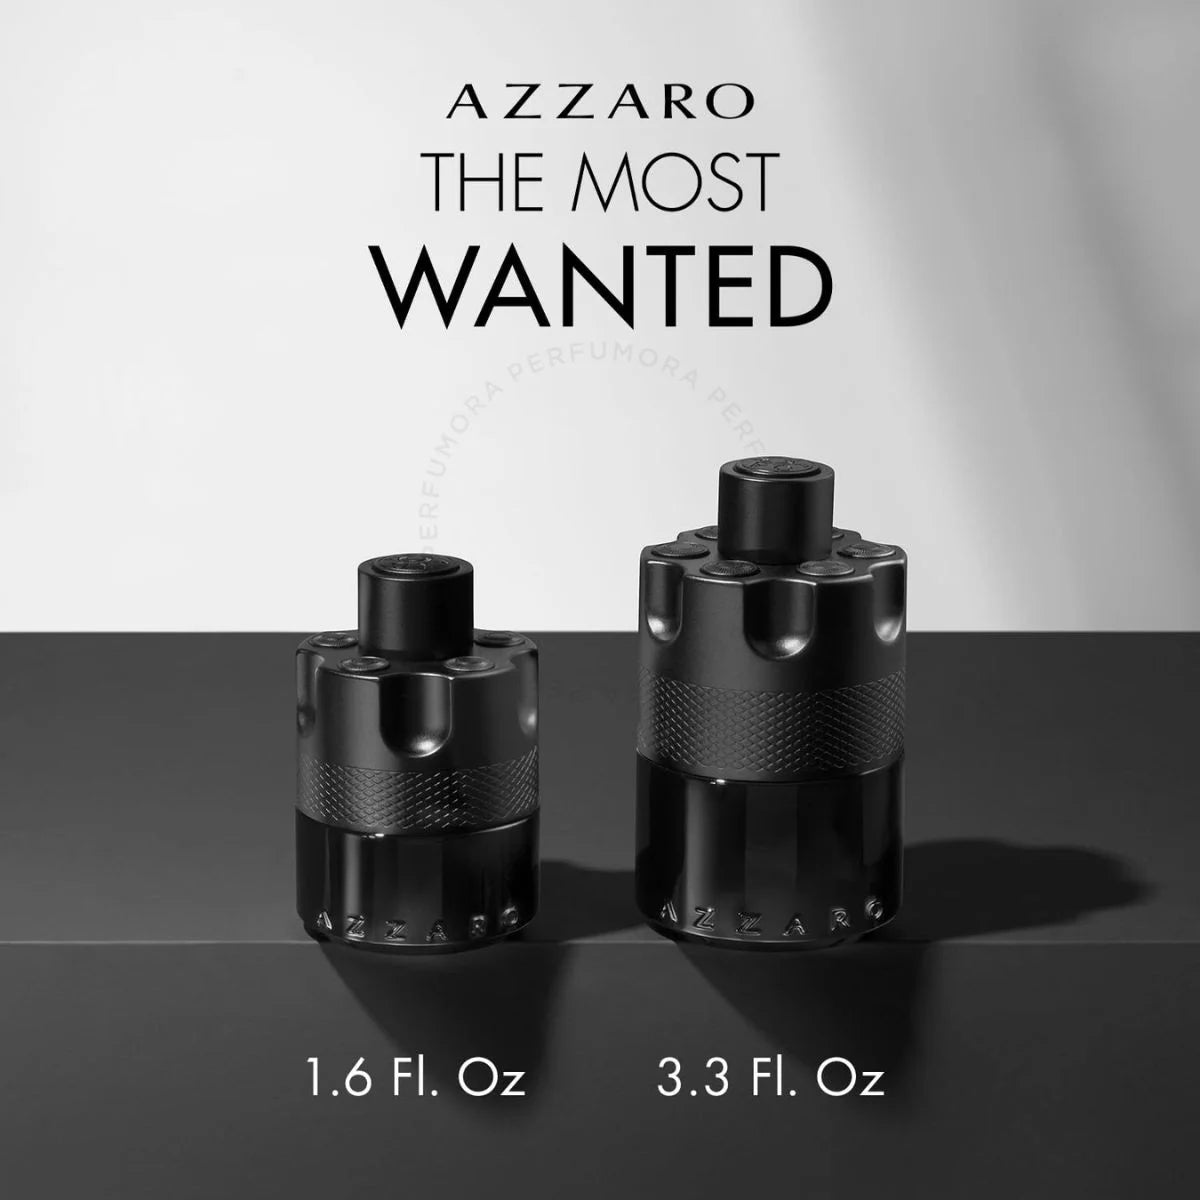 AZZARO The Most Wanted Intense EDP Spray For Men